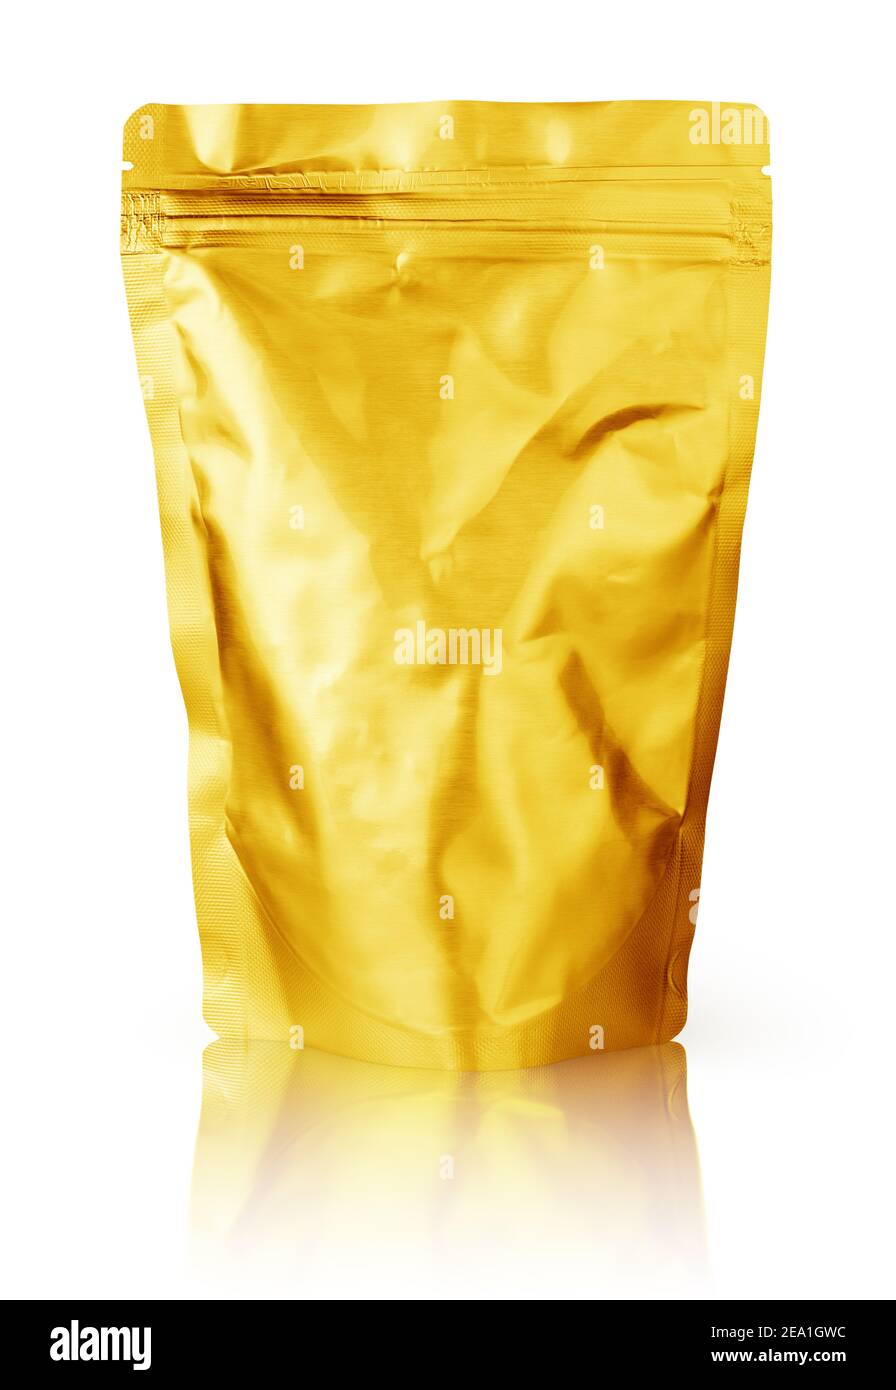 Blank golden foil plastic pouch food packaging isolated on white background. Single gold aluminum coffee package bag with clipping path. Stock Photo